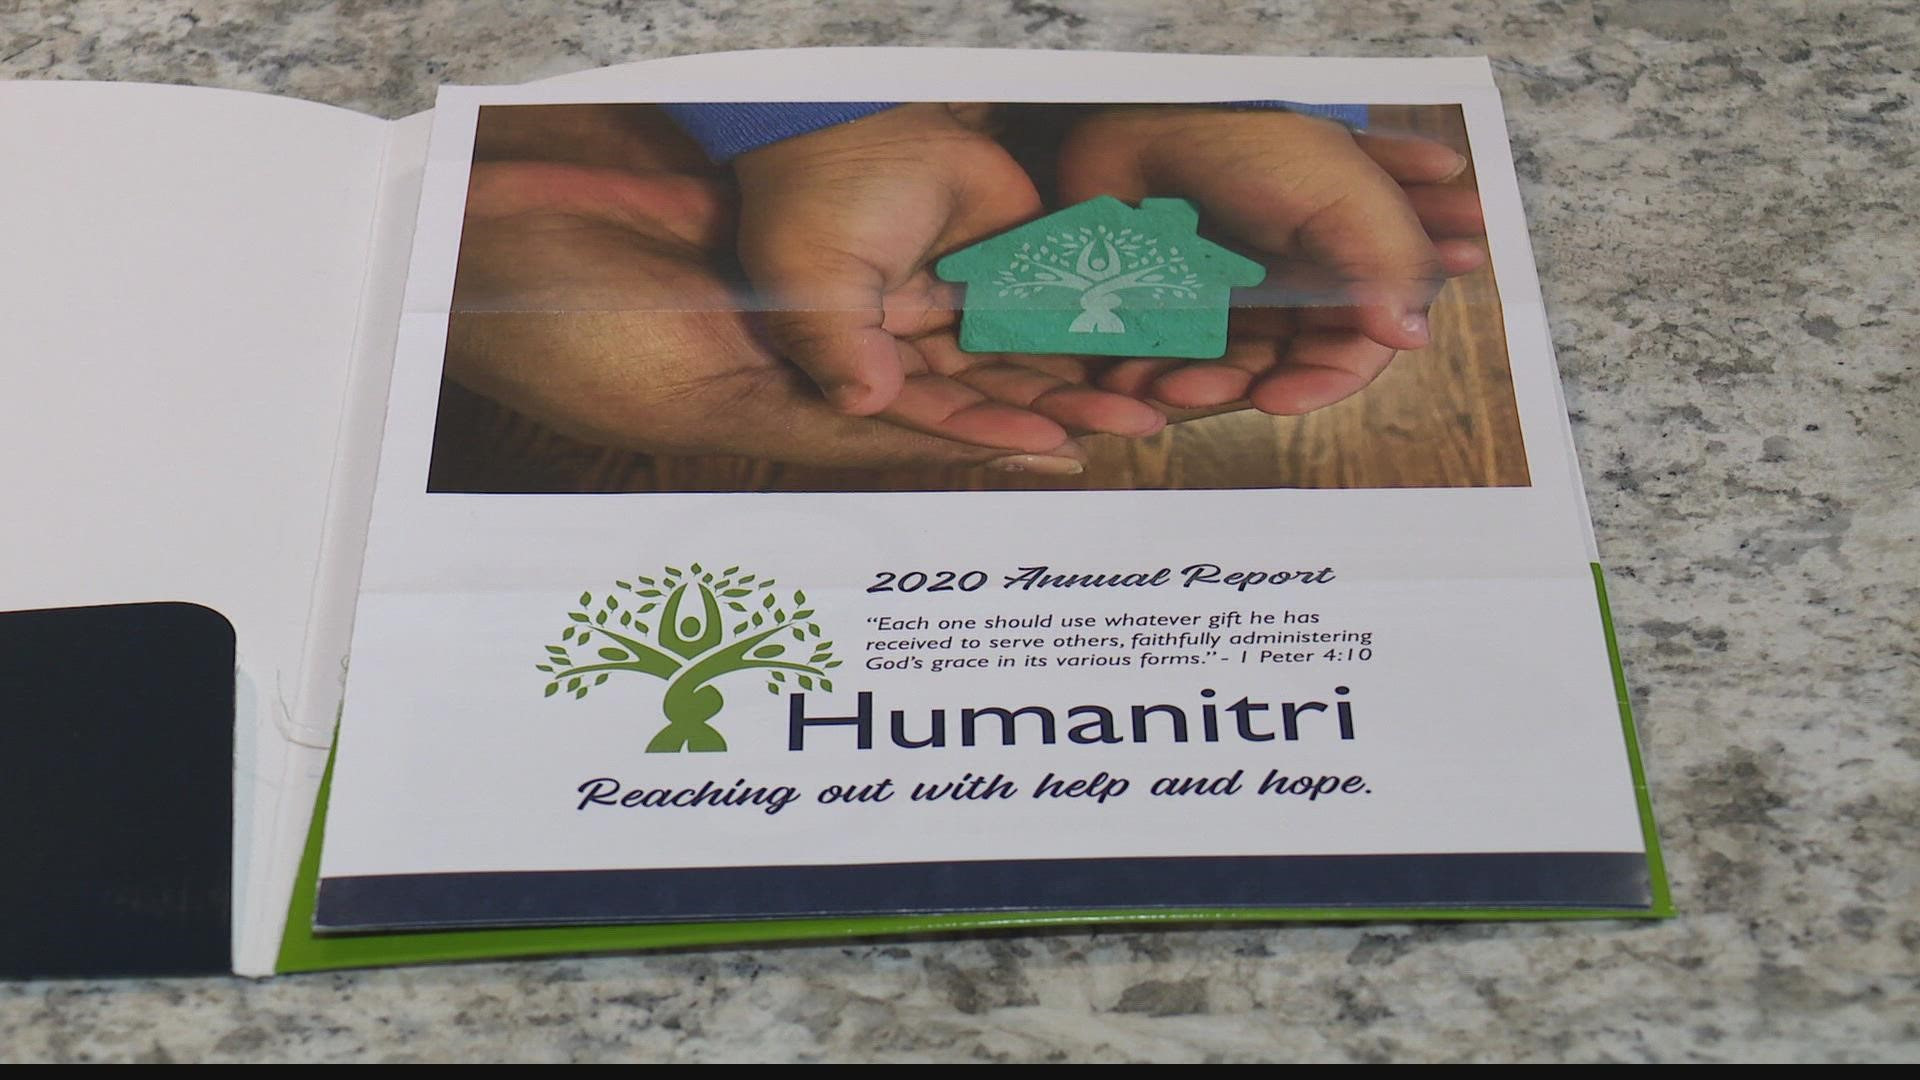 Humanitri is a St. Louis nonprofit organization participating in Give STL Day. Humanitri helps place families in homes to transform their lives.